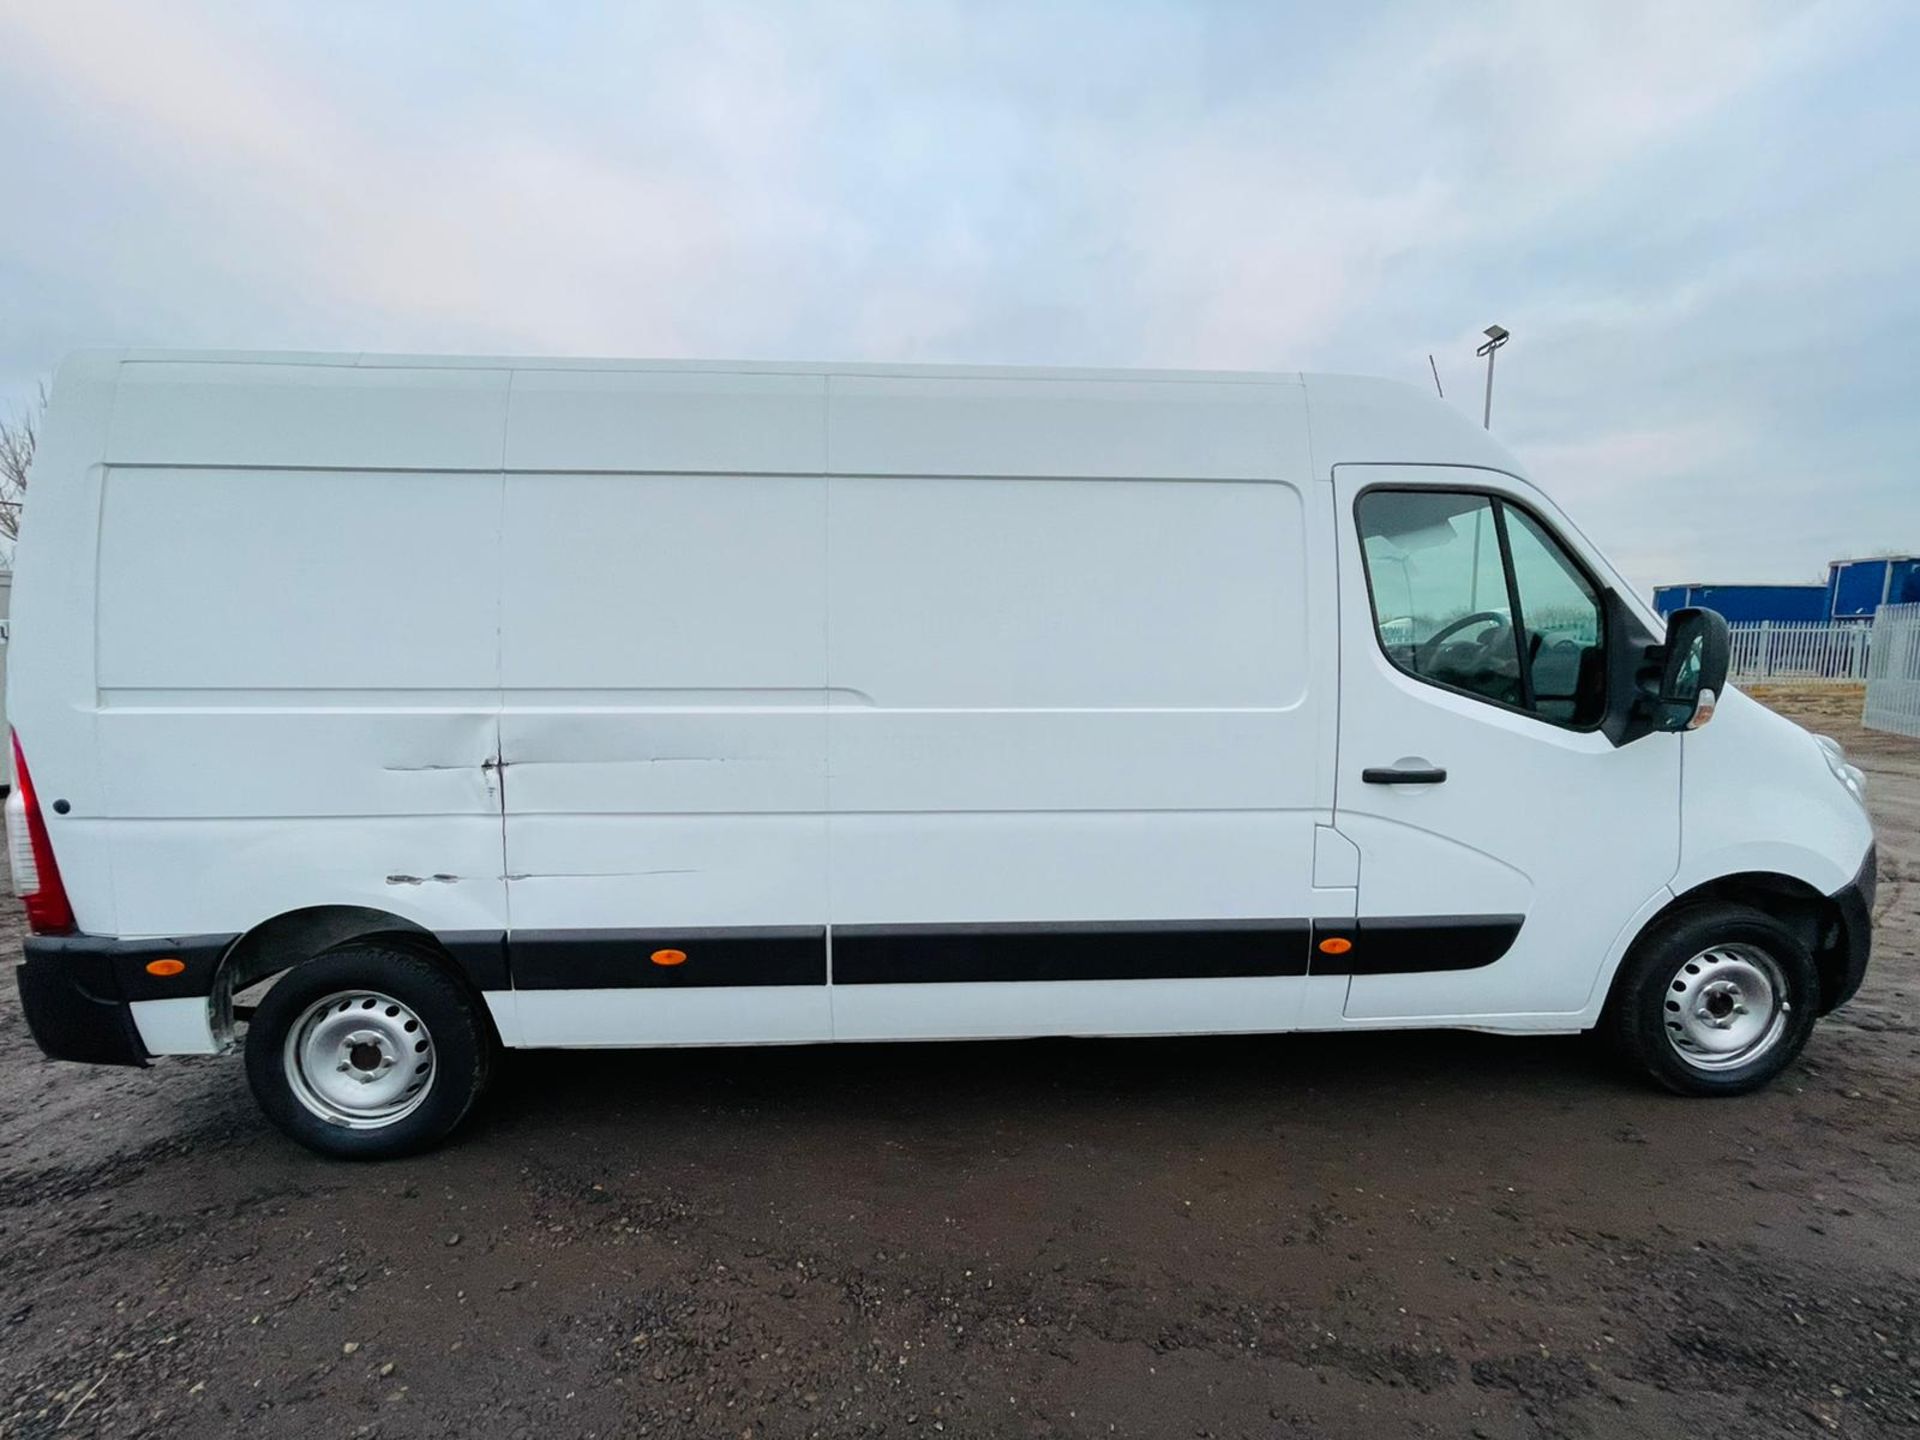 Renault Master 2.3 DCI 110 Business LM35 L3 H2 2016 '16 reg' Fridge/Freezer - Fully Insulated - Image 13 of 23